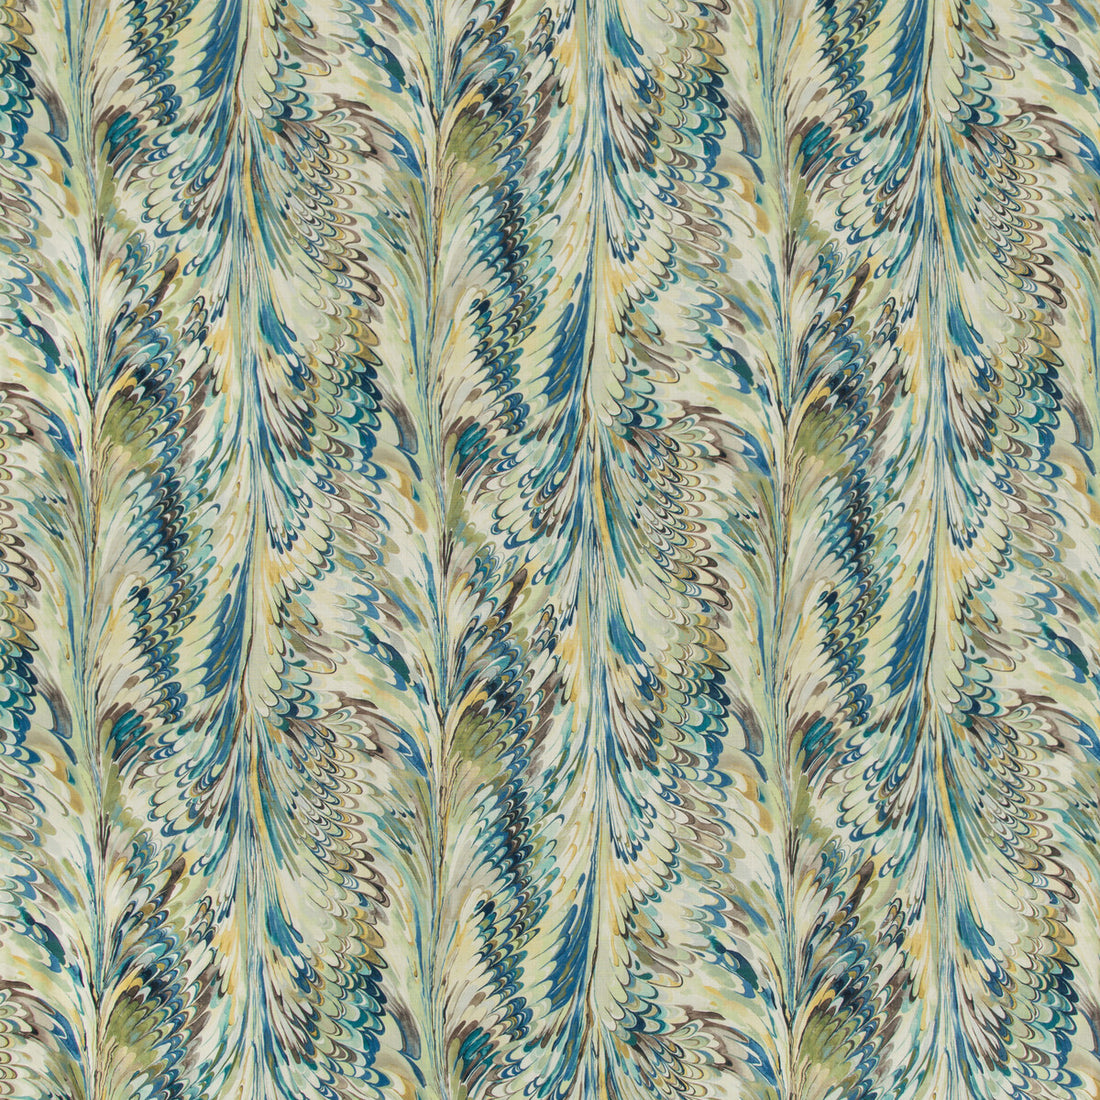 Taplow Print fabric in peacock/gold color - pattern 2019114.345.0 - by Lee Jofa in the Manor House collection